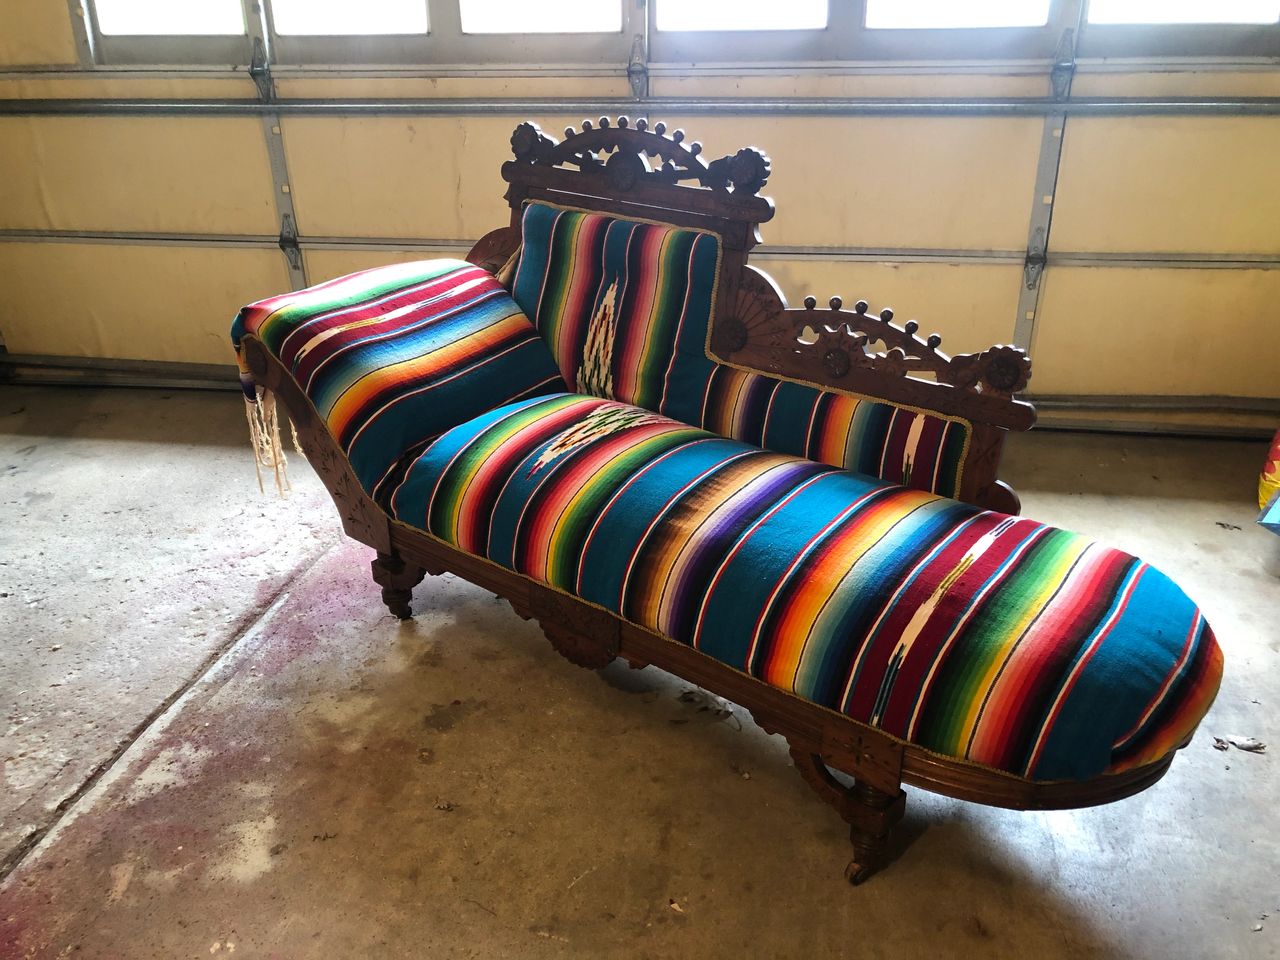 Vintage Eastlake chaise lounge in a garage